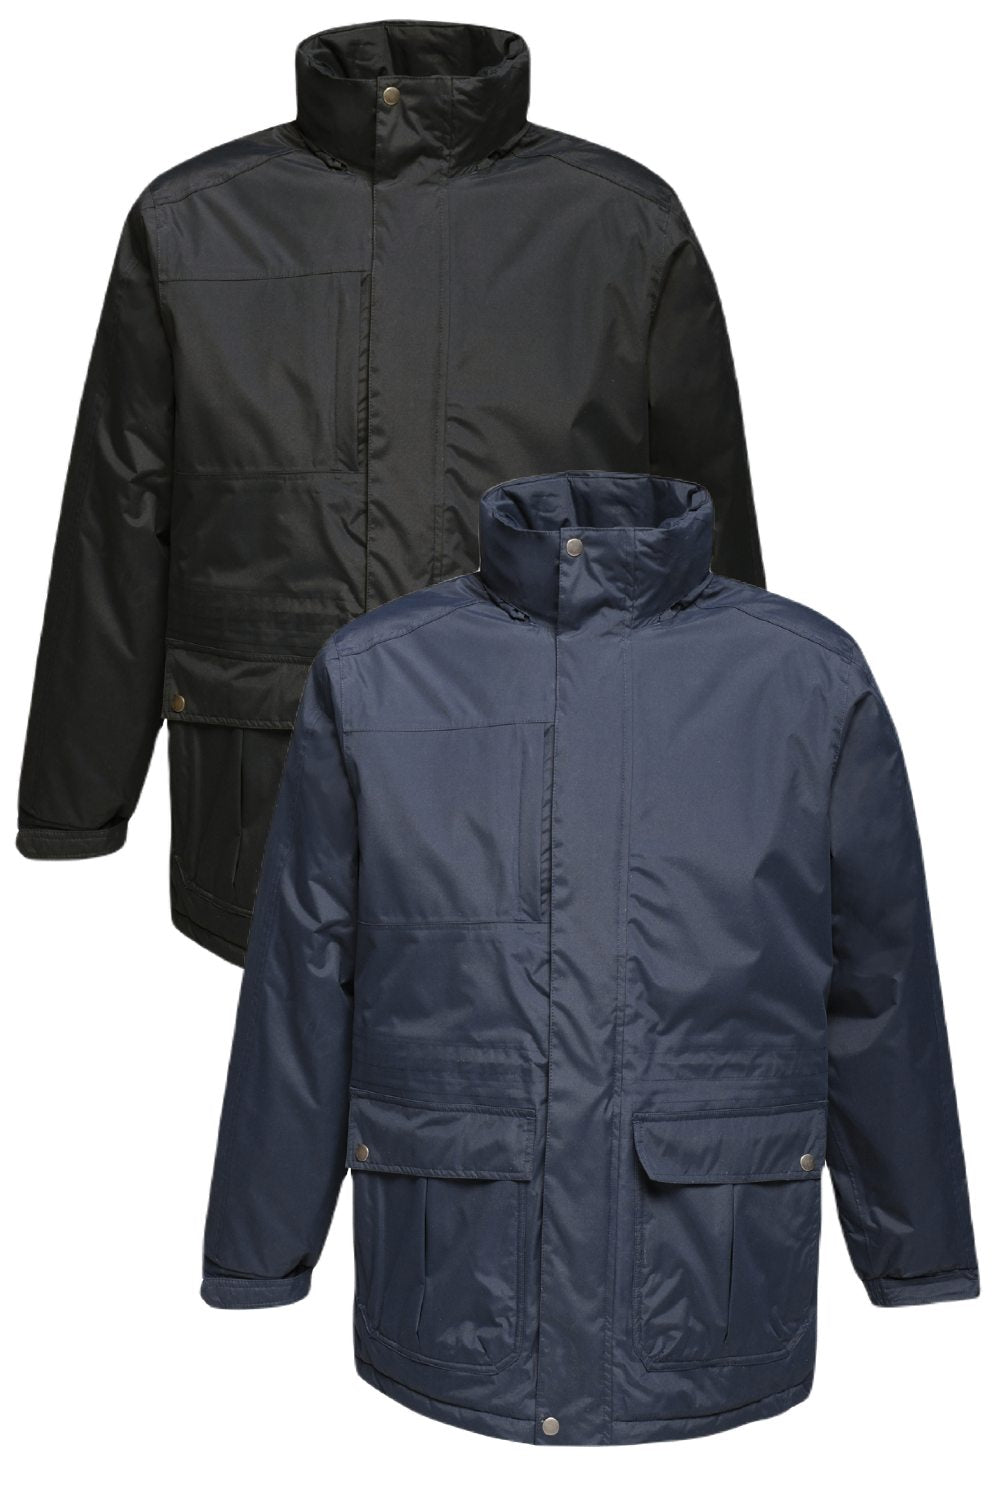 Regatta Darby III Insulated Parka Jacket In Black and Navy 